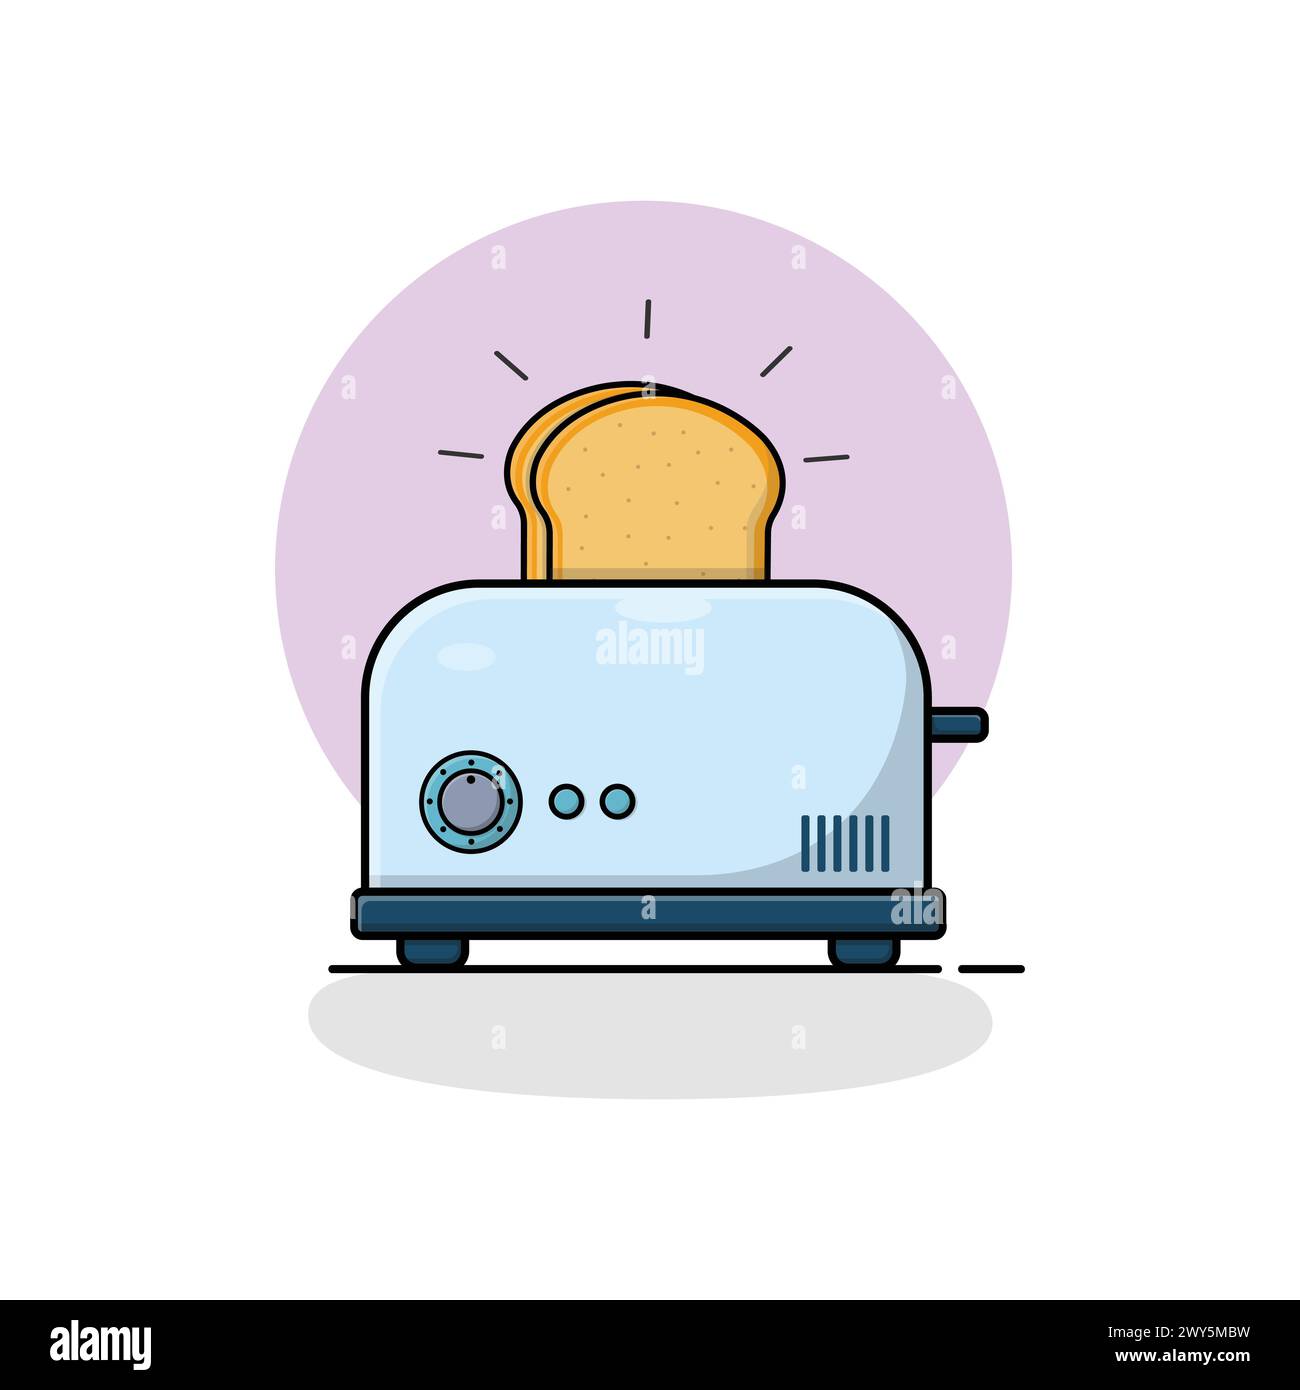 Toaster and bread Vector Illustration. kitchen equipment Concept Stock Vector